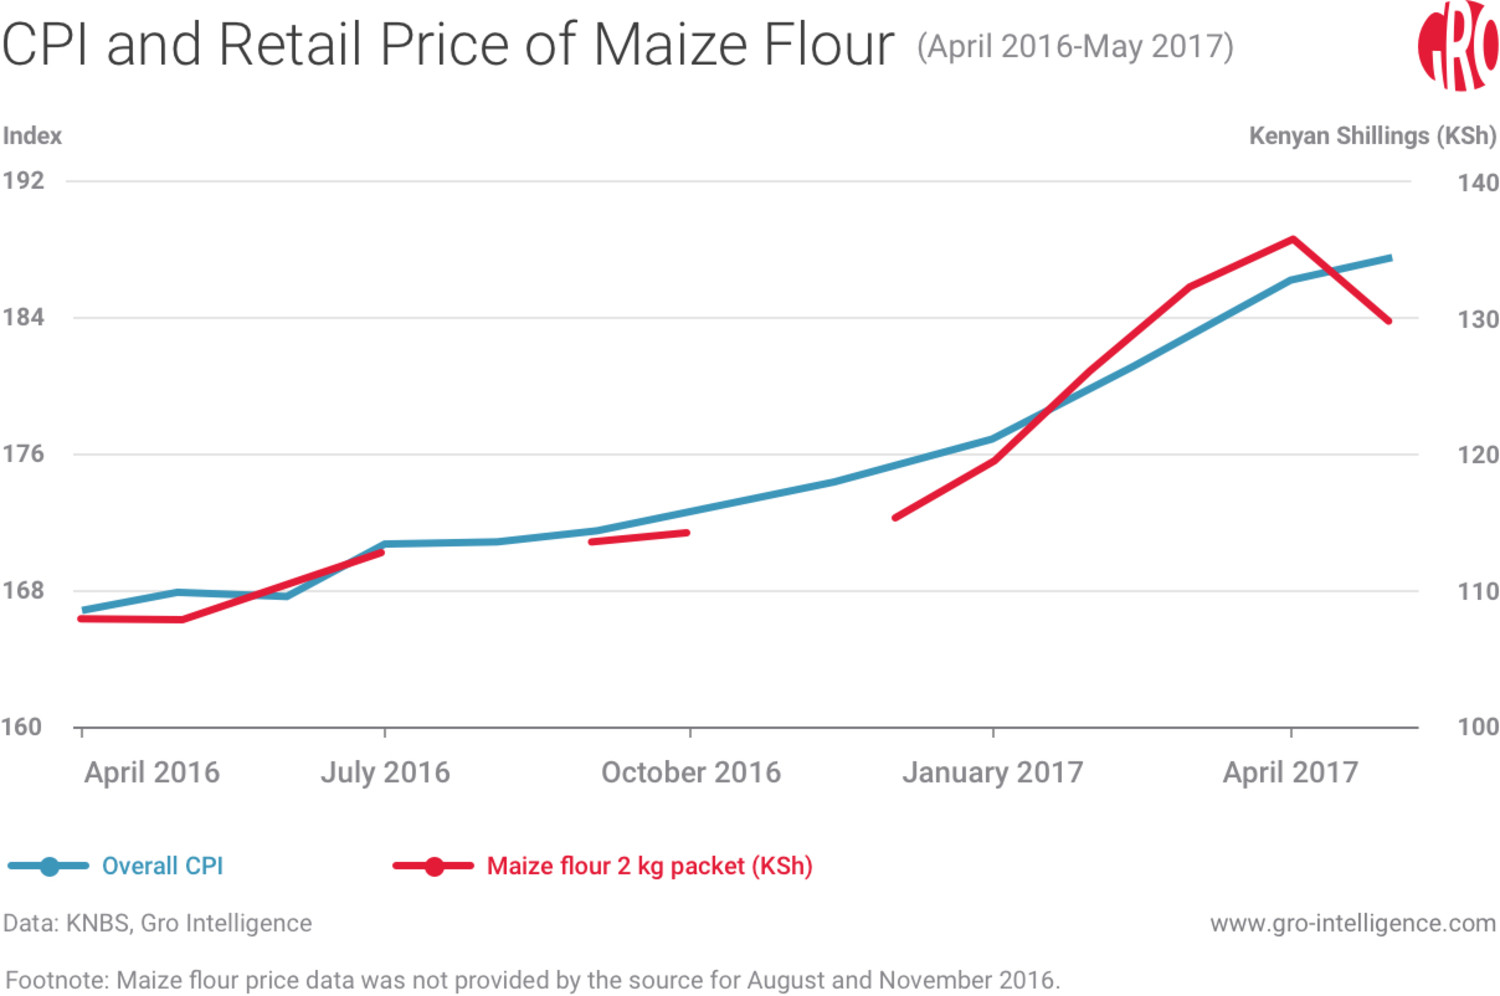 CPI and Retail Price of Maize Flour (April 2016-May 2017)